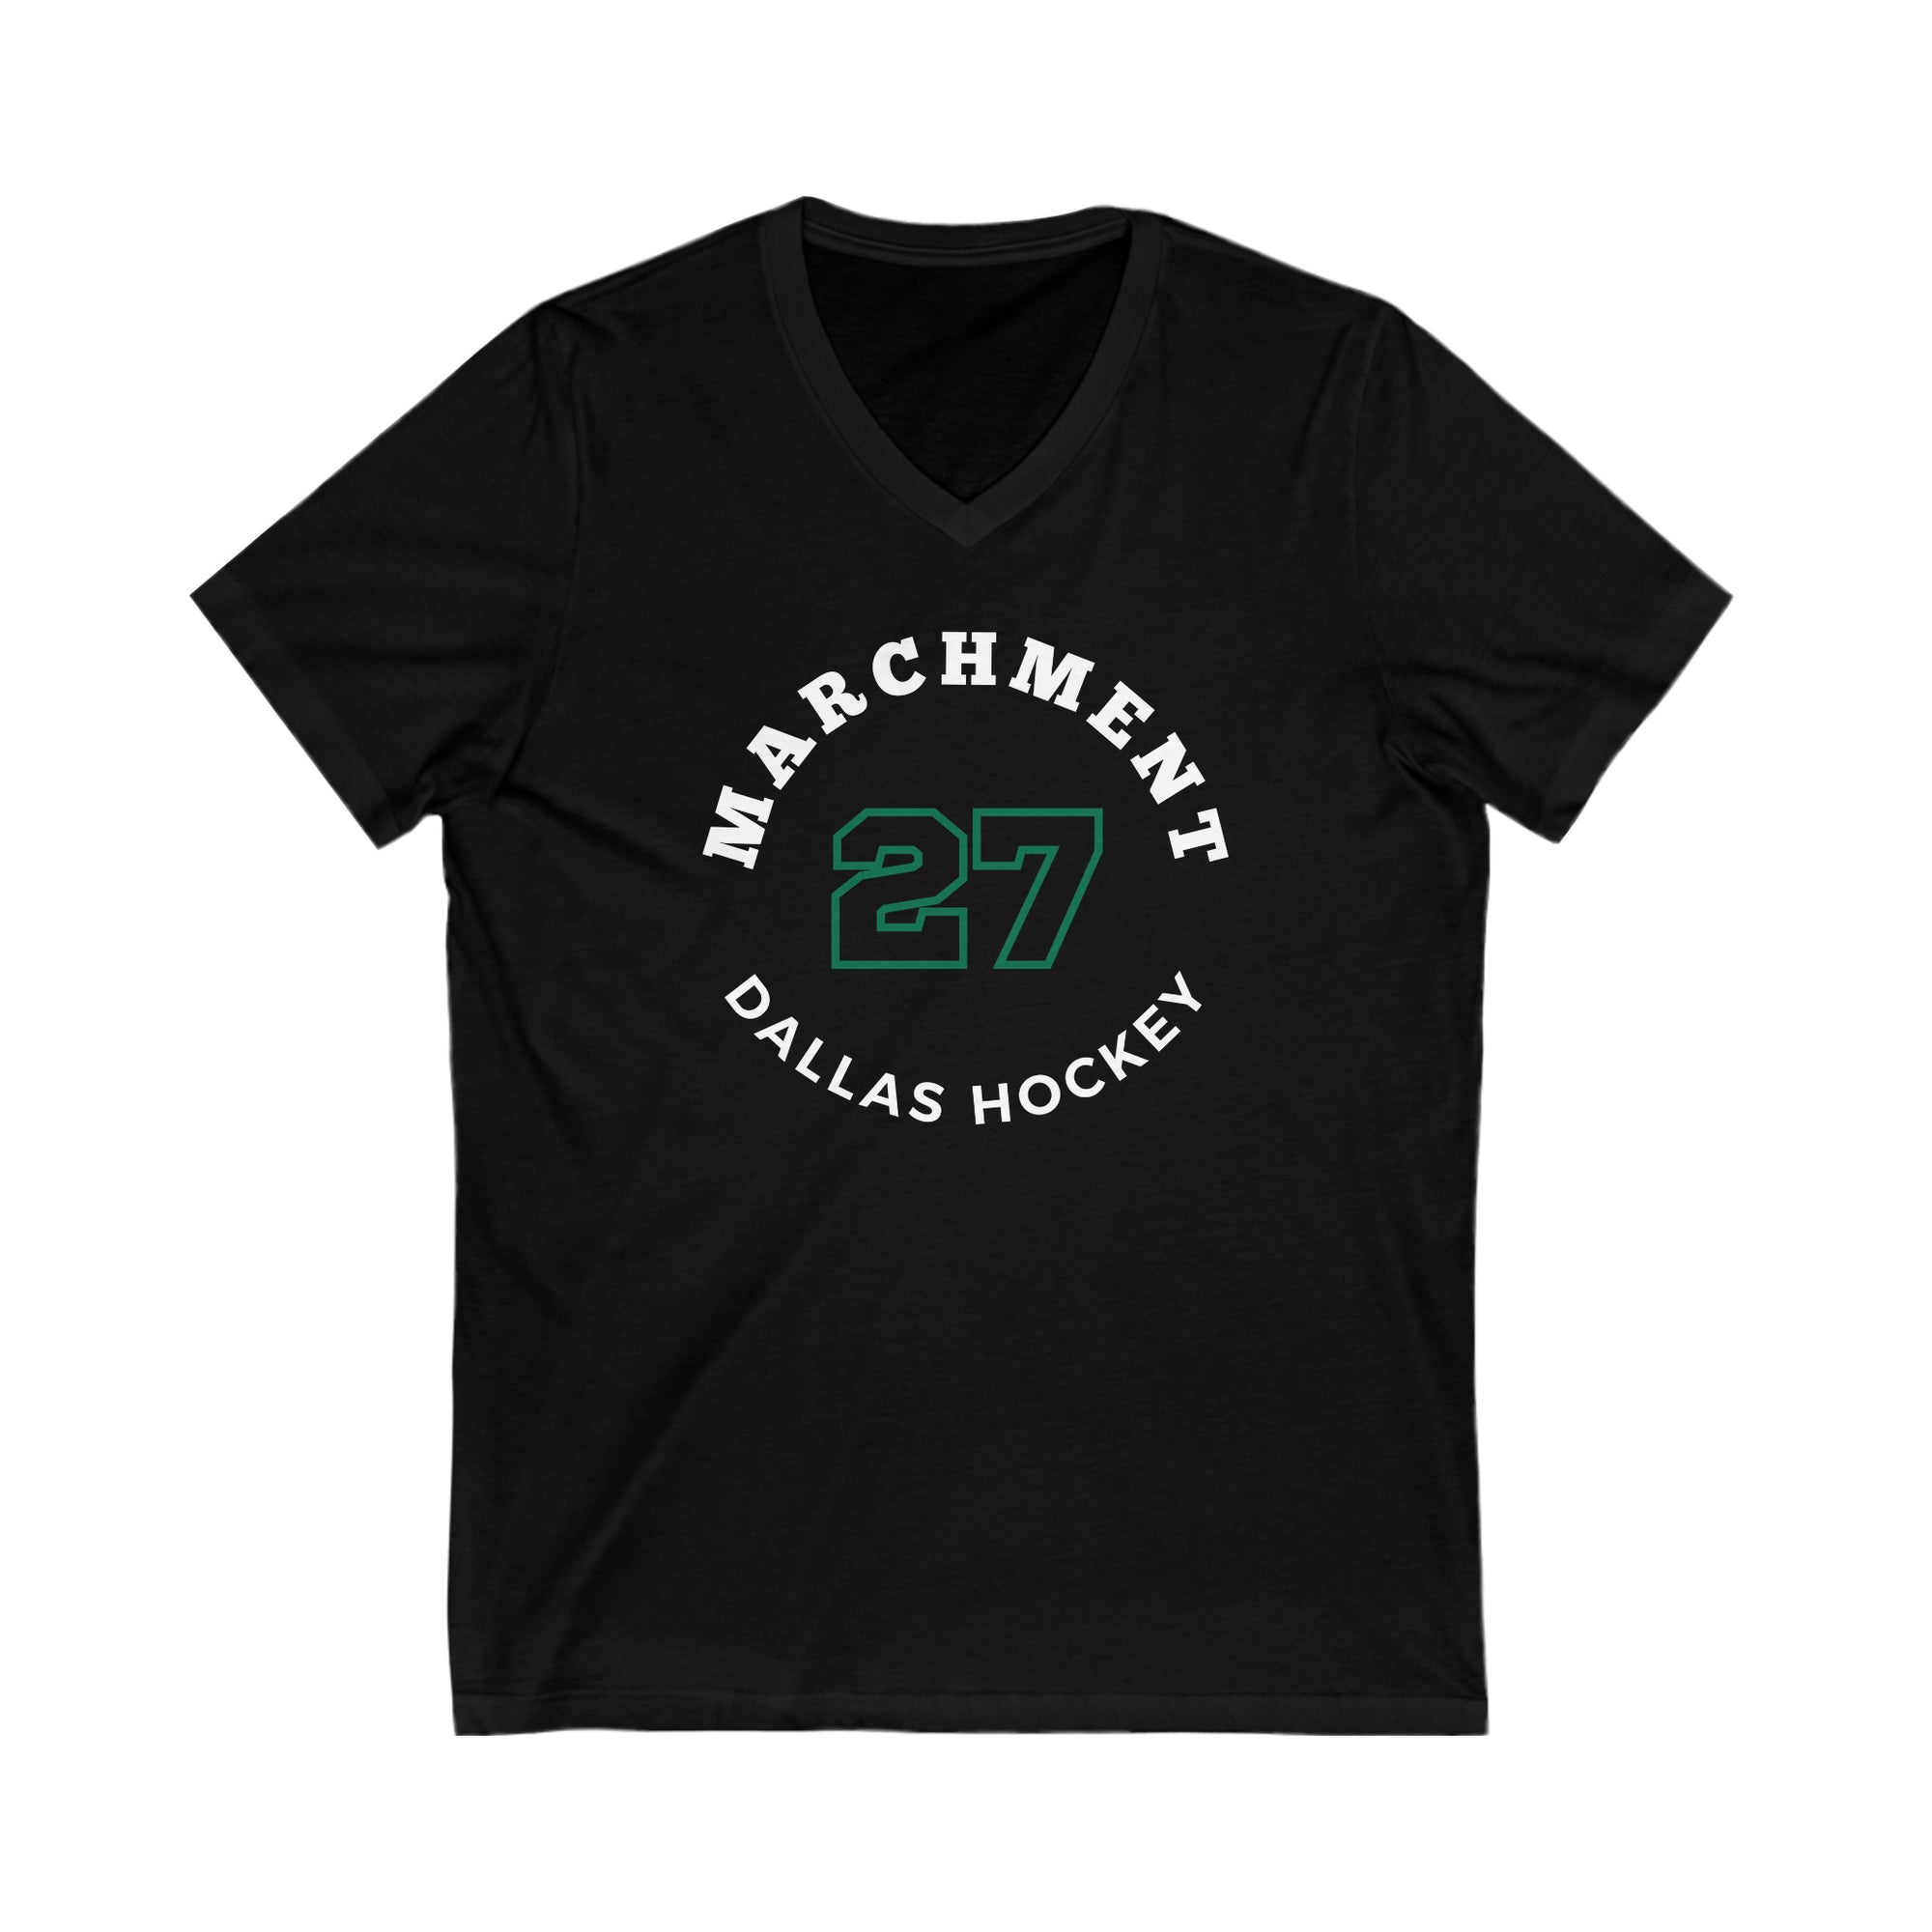 Marchment 27 Dallas Hockey Number Arch Design Unisex V-Neck Tee